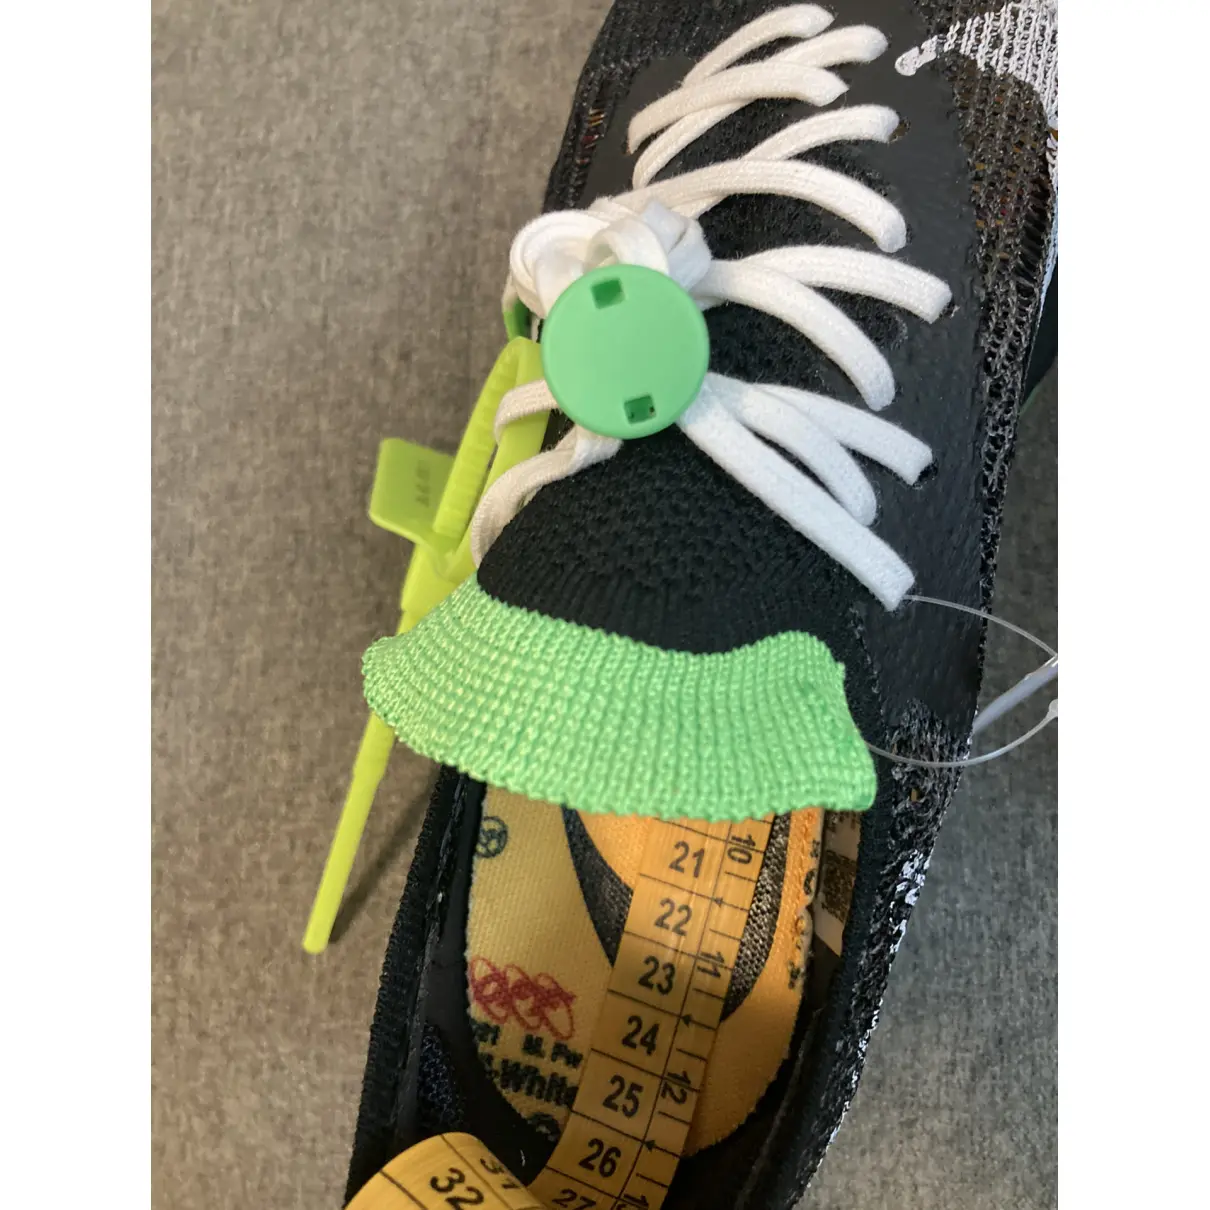 Buy Nike x Off-White Trainers online